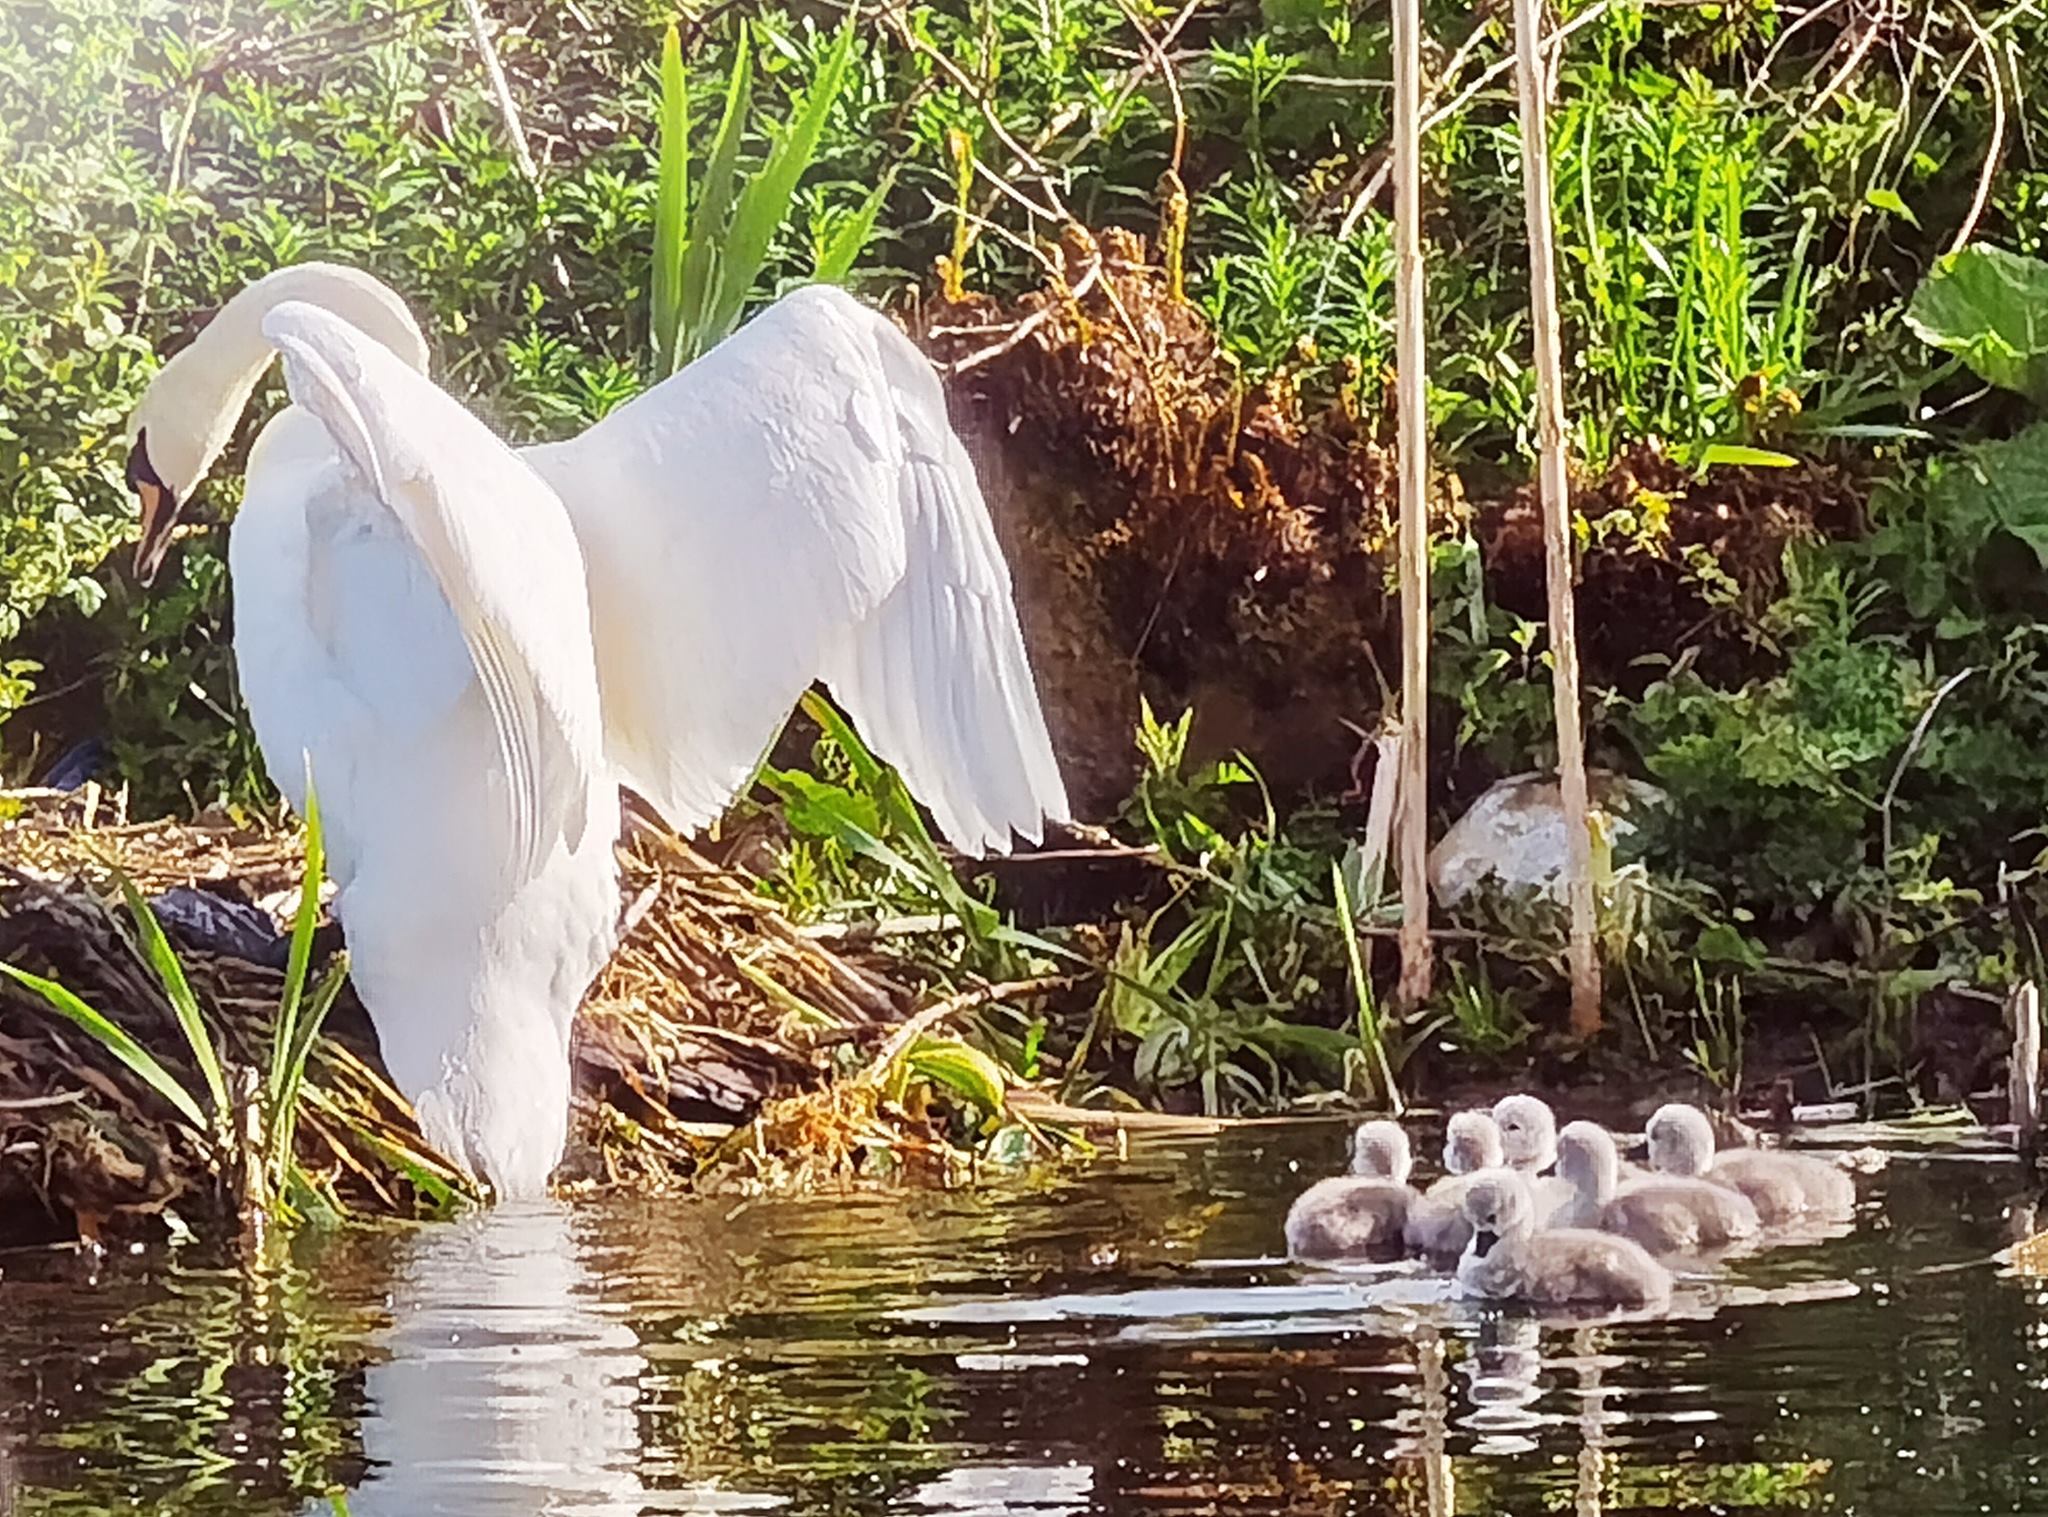 A mother swan with her baby cygnets at Old Kilpatrick by Graeme Thom